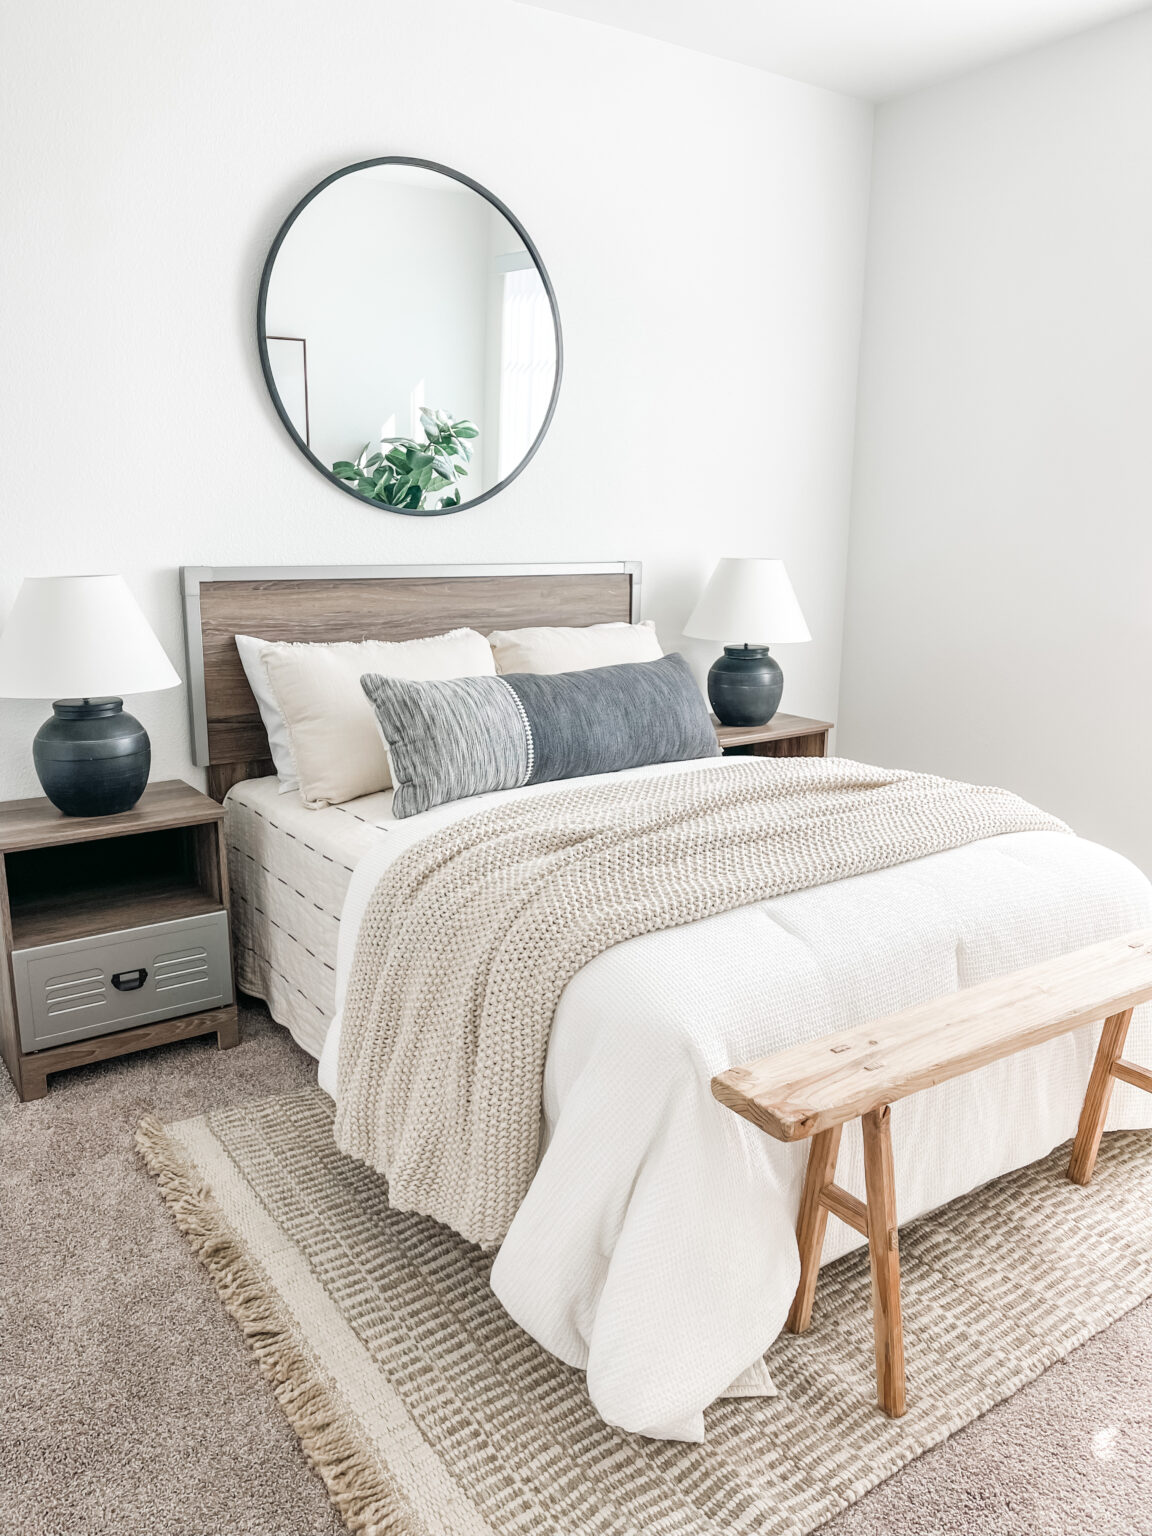 Home Staging Sacramento - mint home staging company